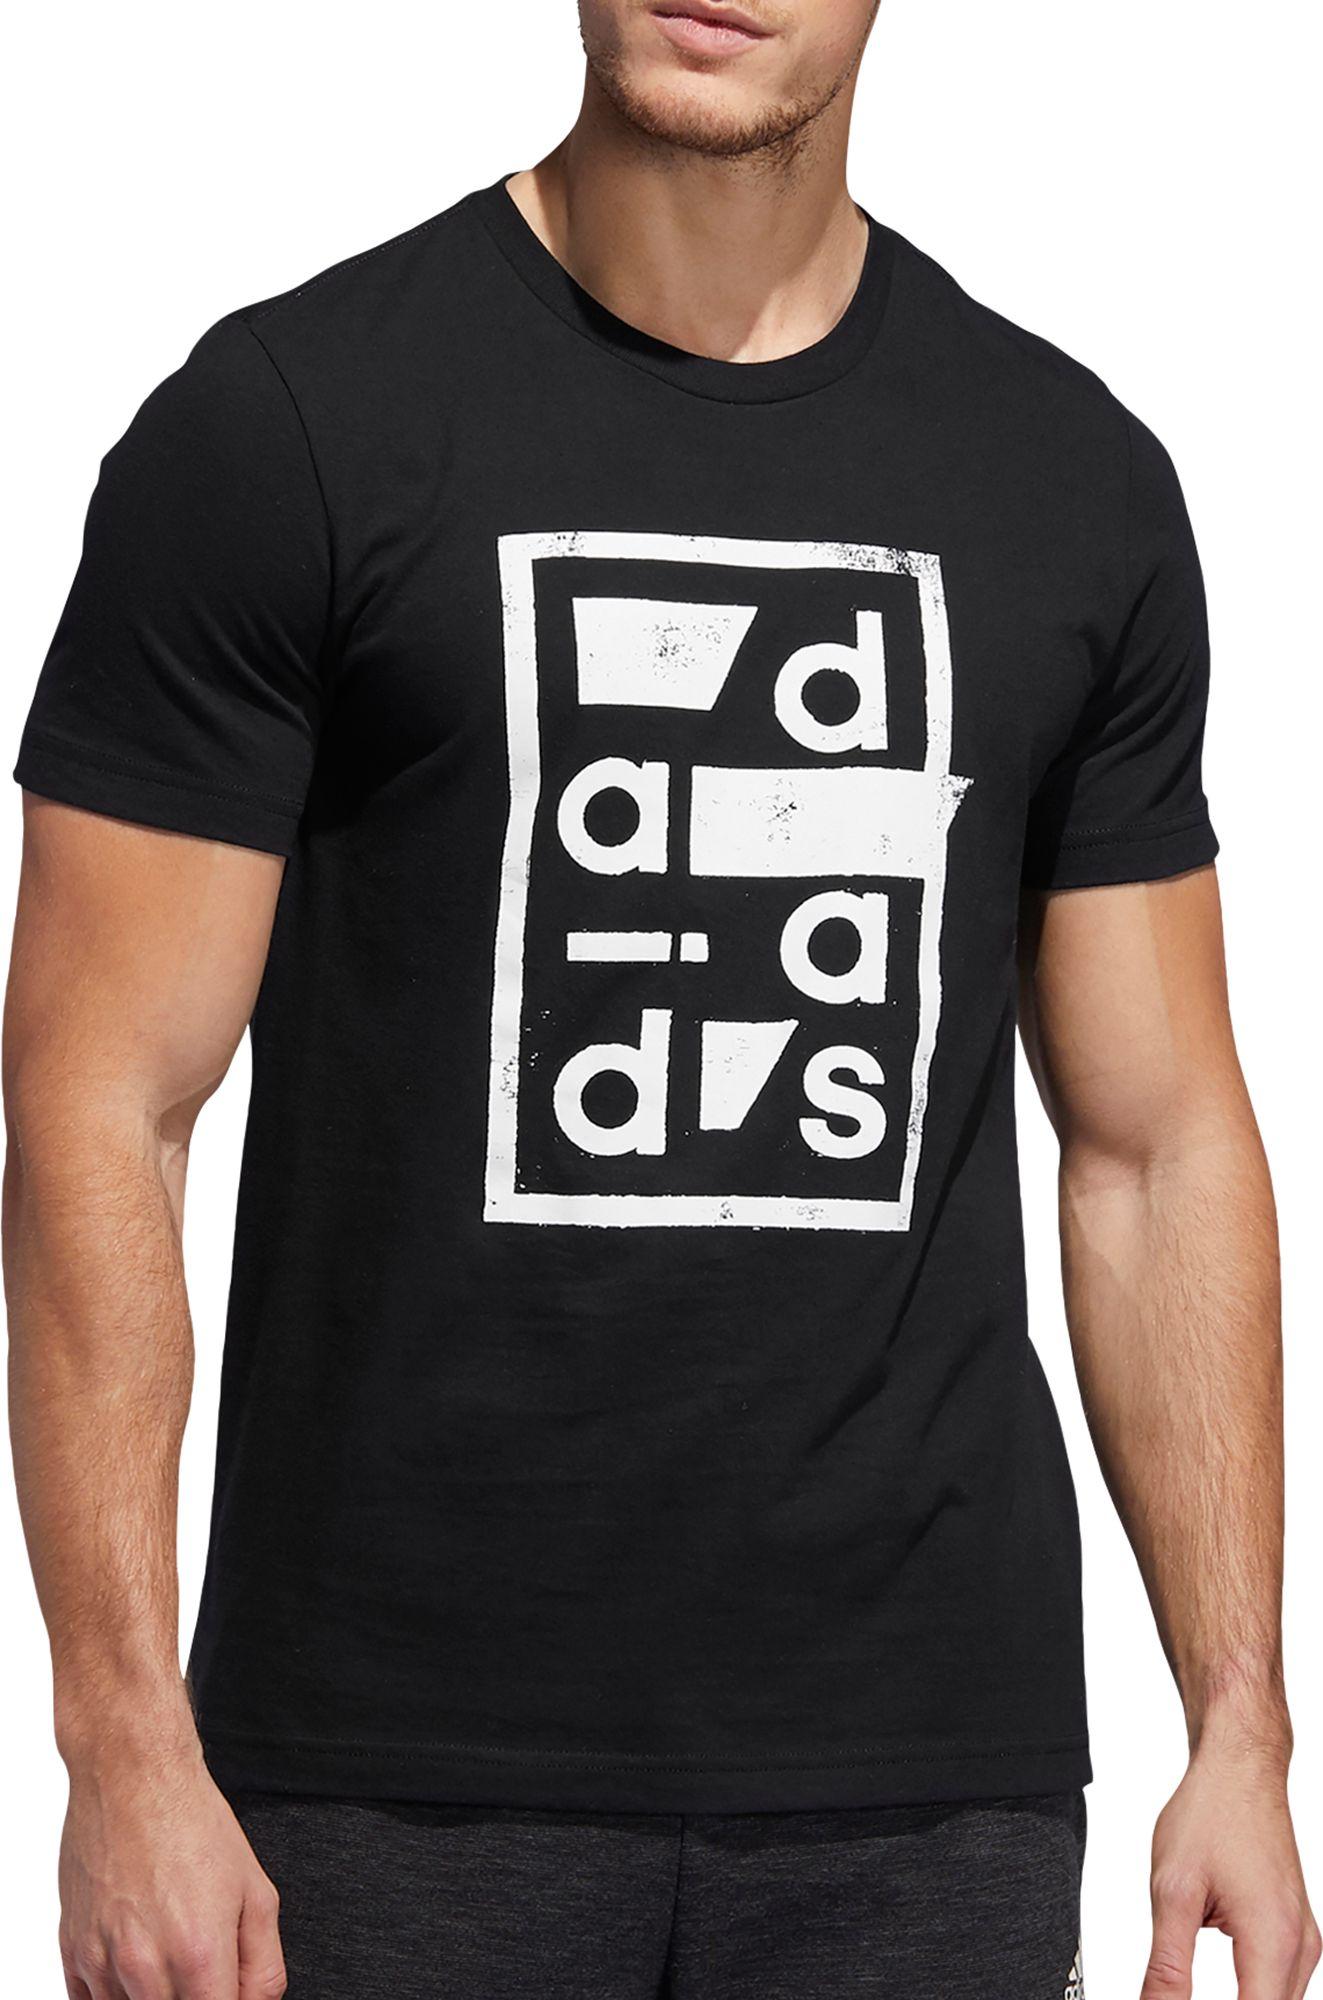 adidas Cotton Scatter Amplifier Graphic T-shirt in Black for Men - Lyst